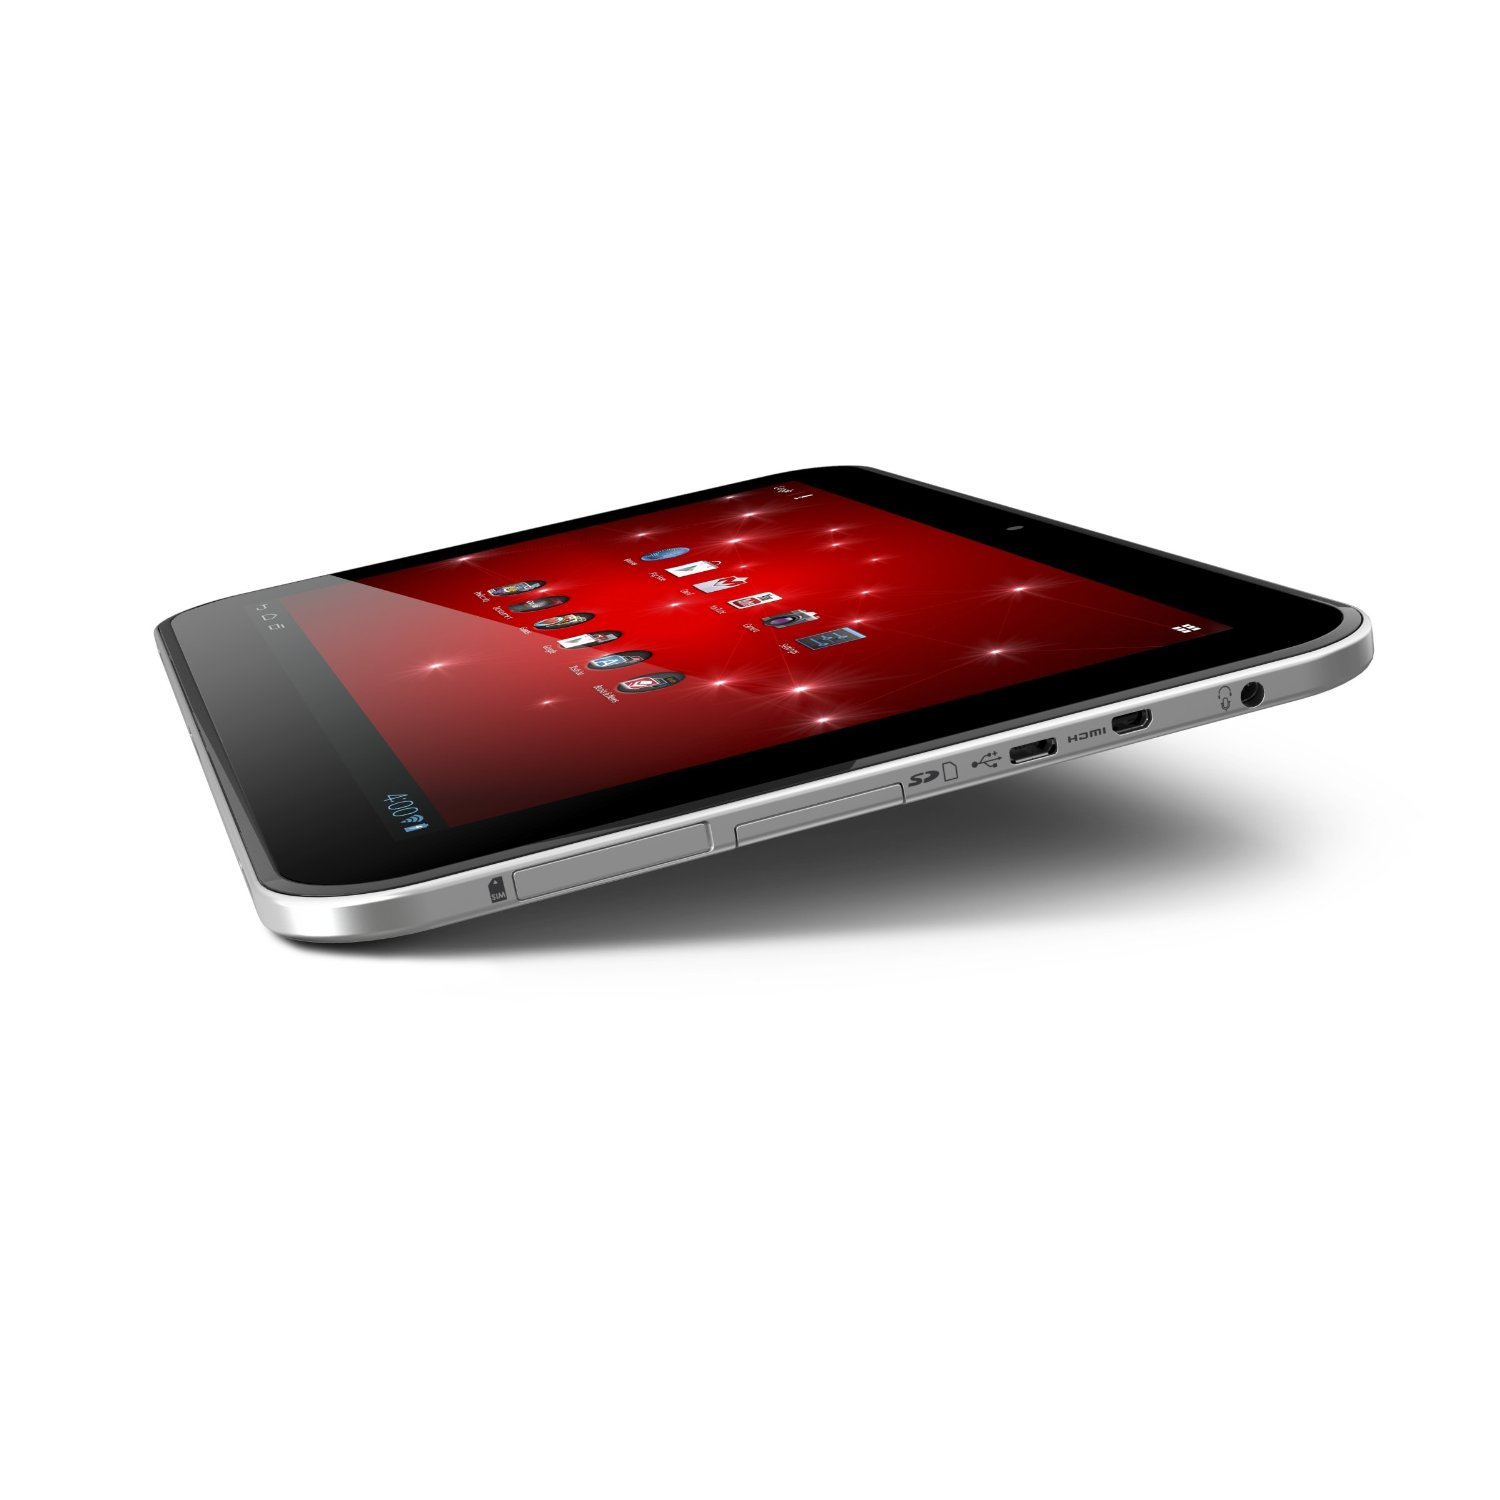 http://thetechjournal.com/wp-content/uploads/images/1206/1340174474-toshiba-excite-101inch-tablet-powered-by-android-40-9.jpg